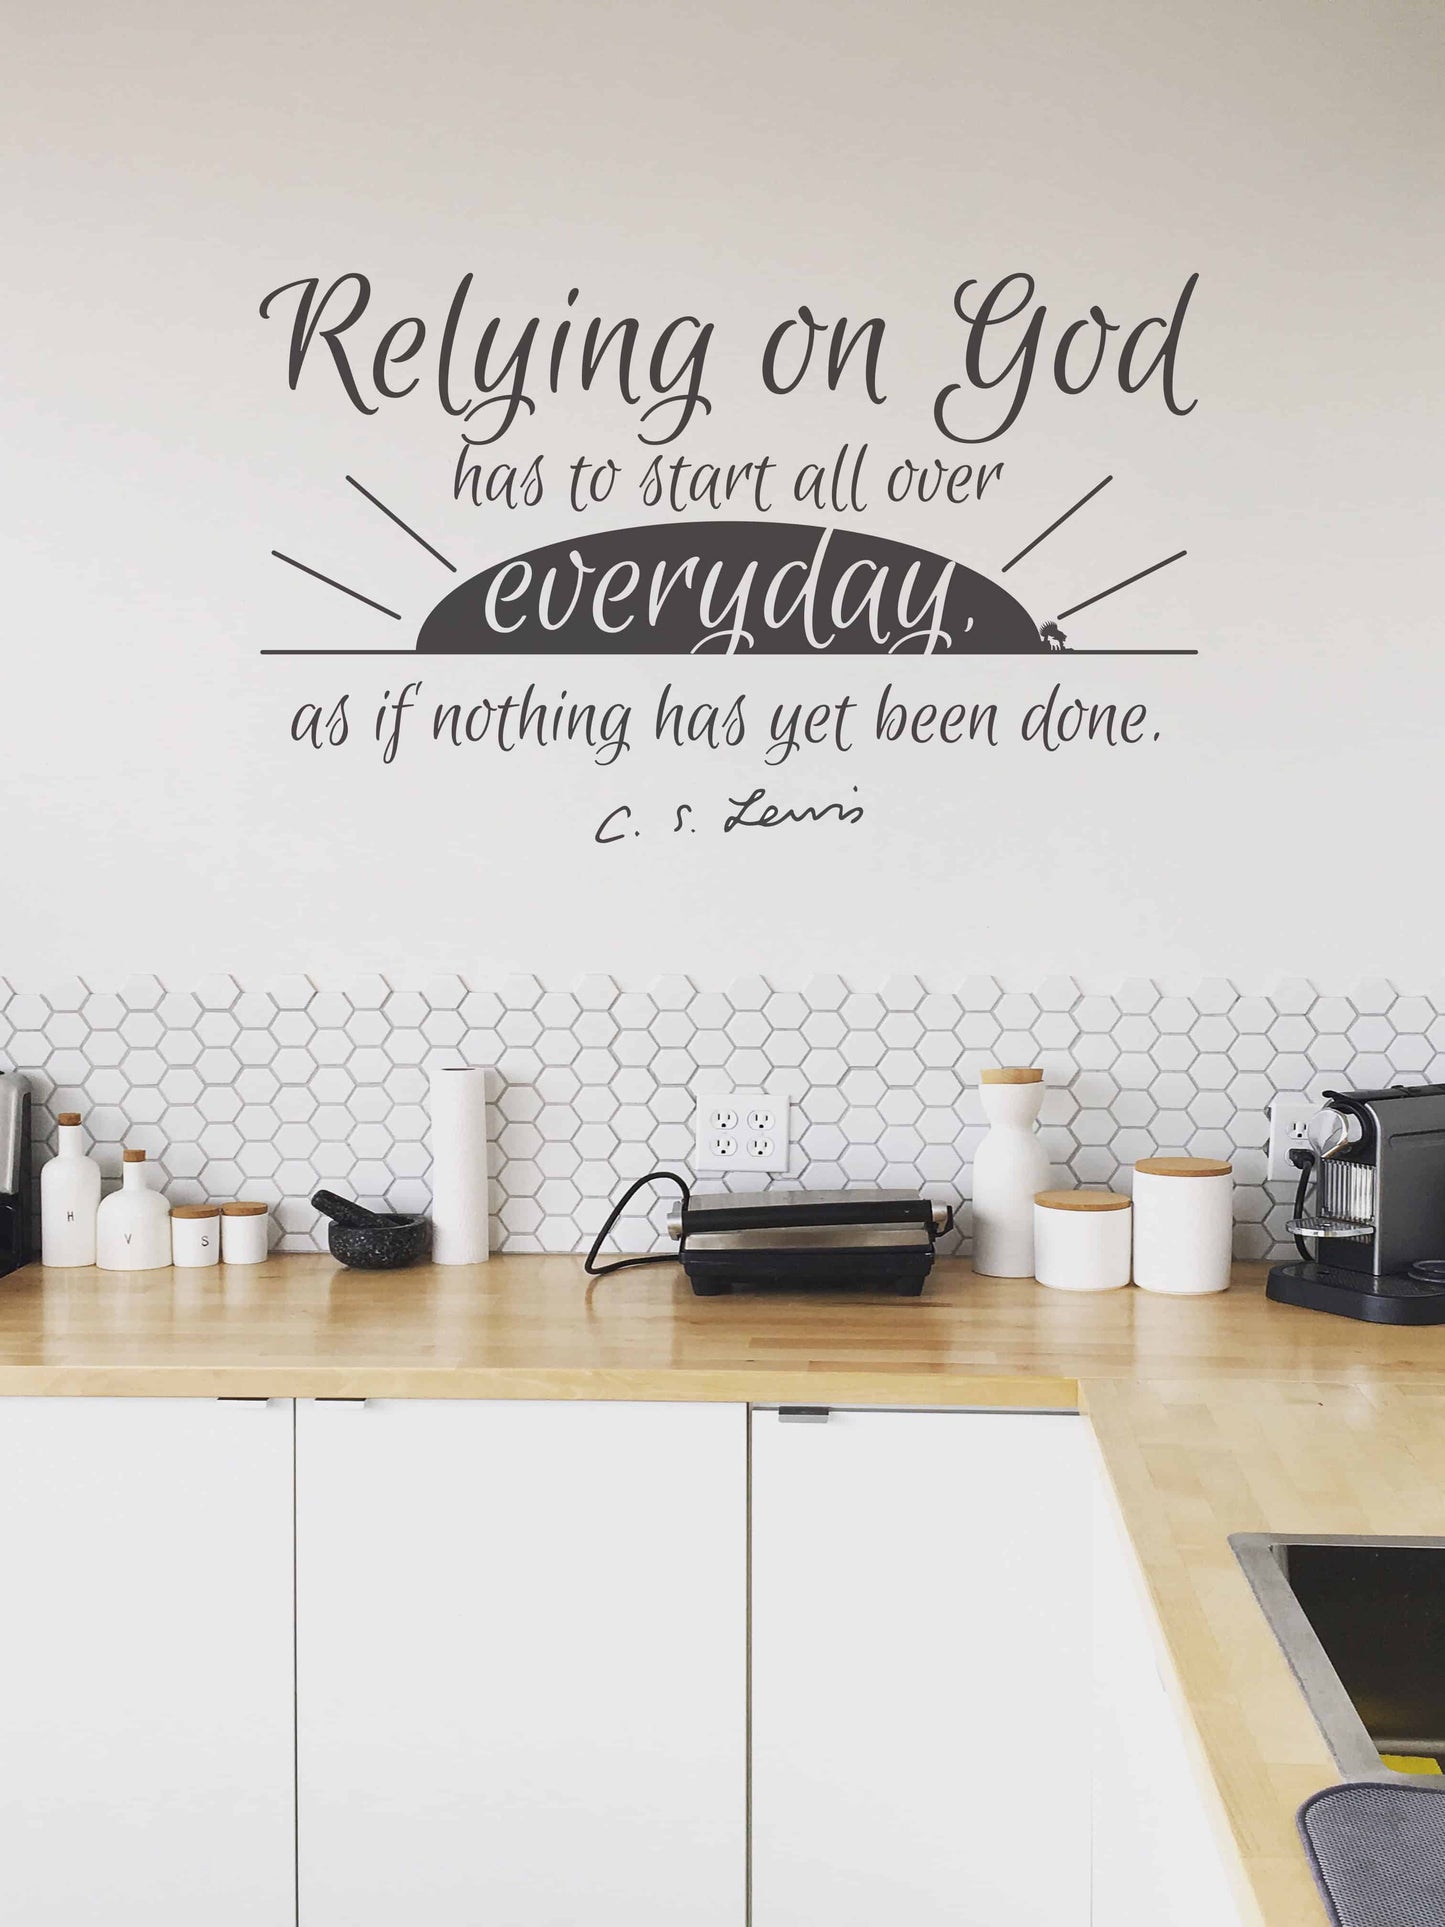 Relying on God - CS Lewis Vinyl Wall Decal